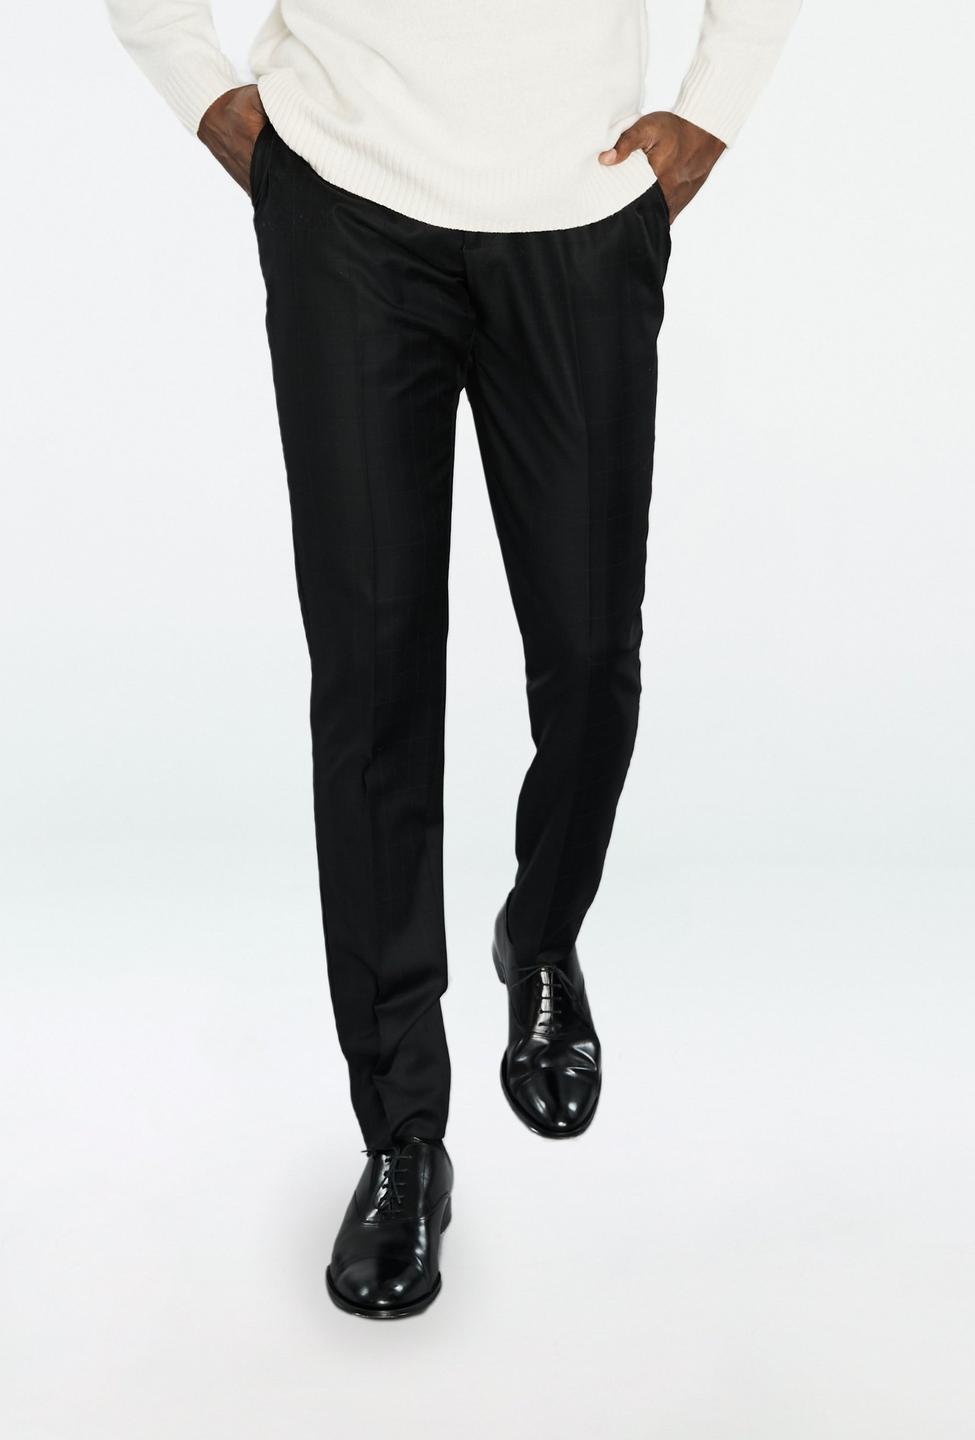 Black pants - RJ Checked Design from RJ Collection Indochino Collection